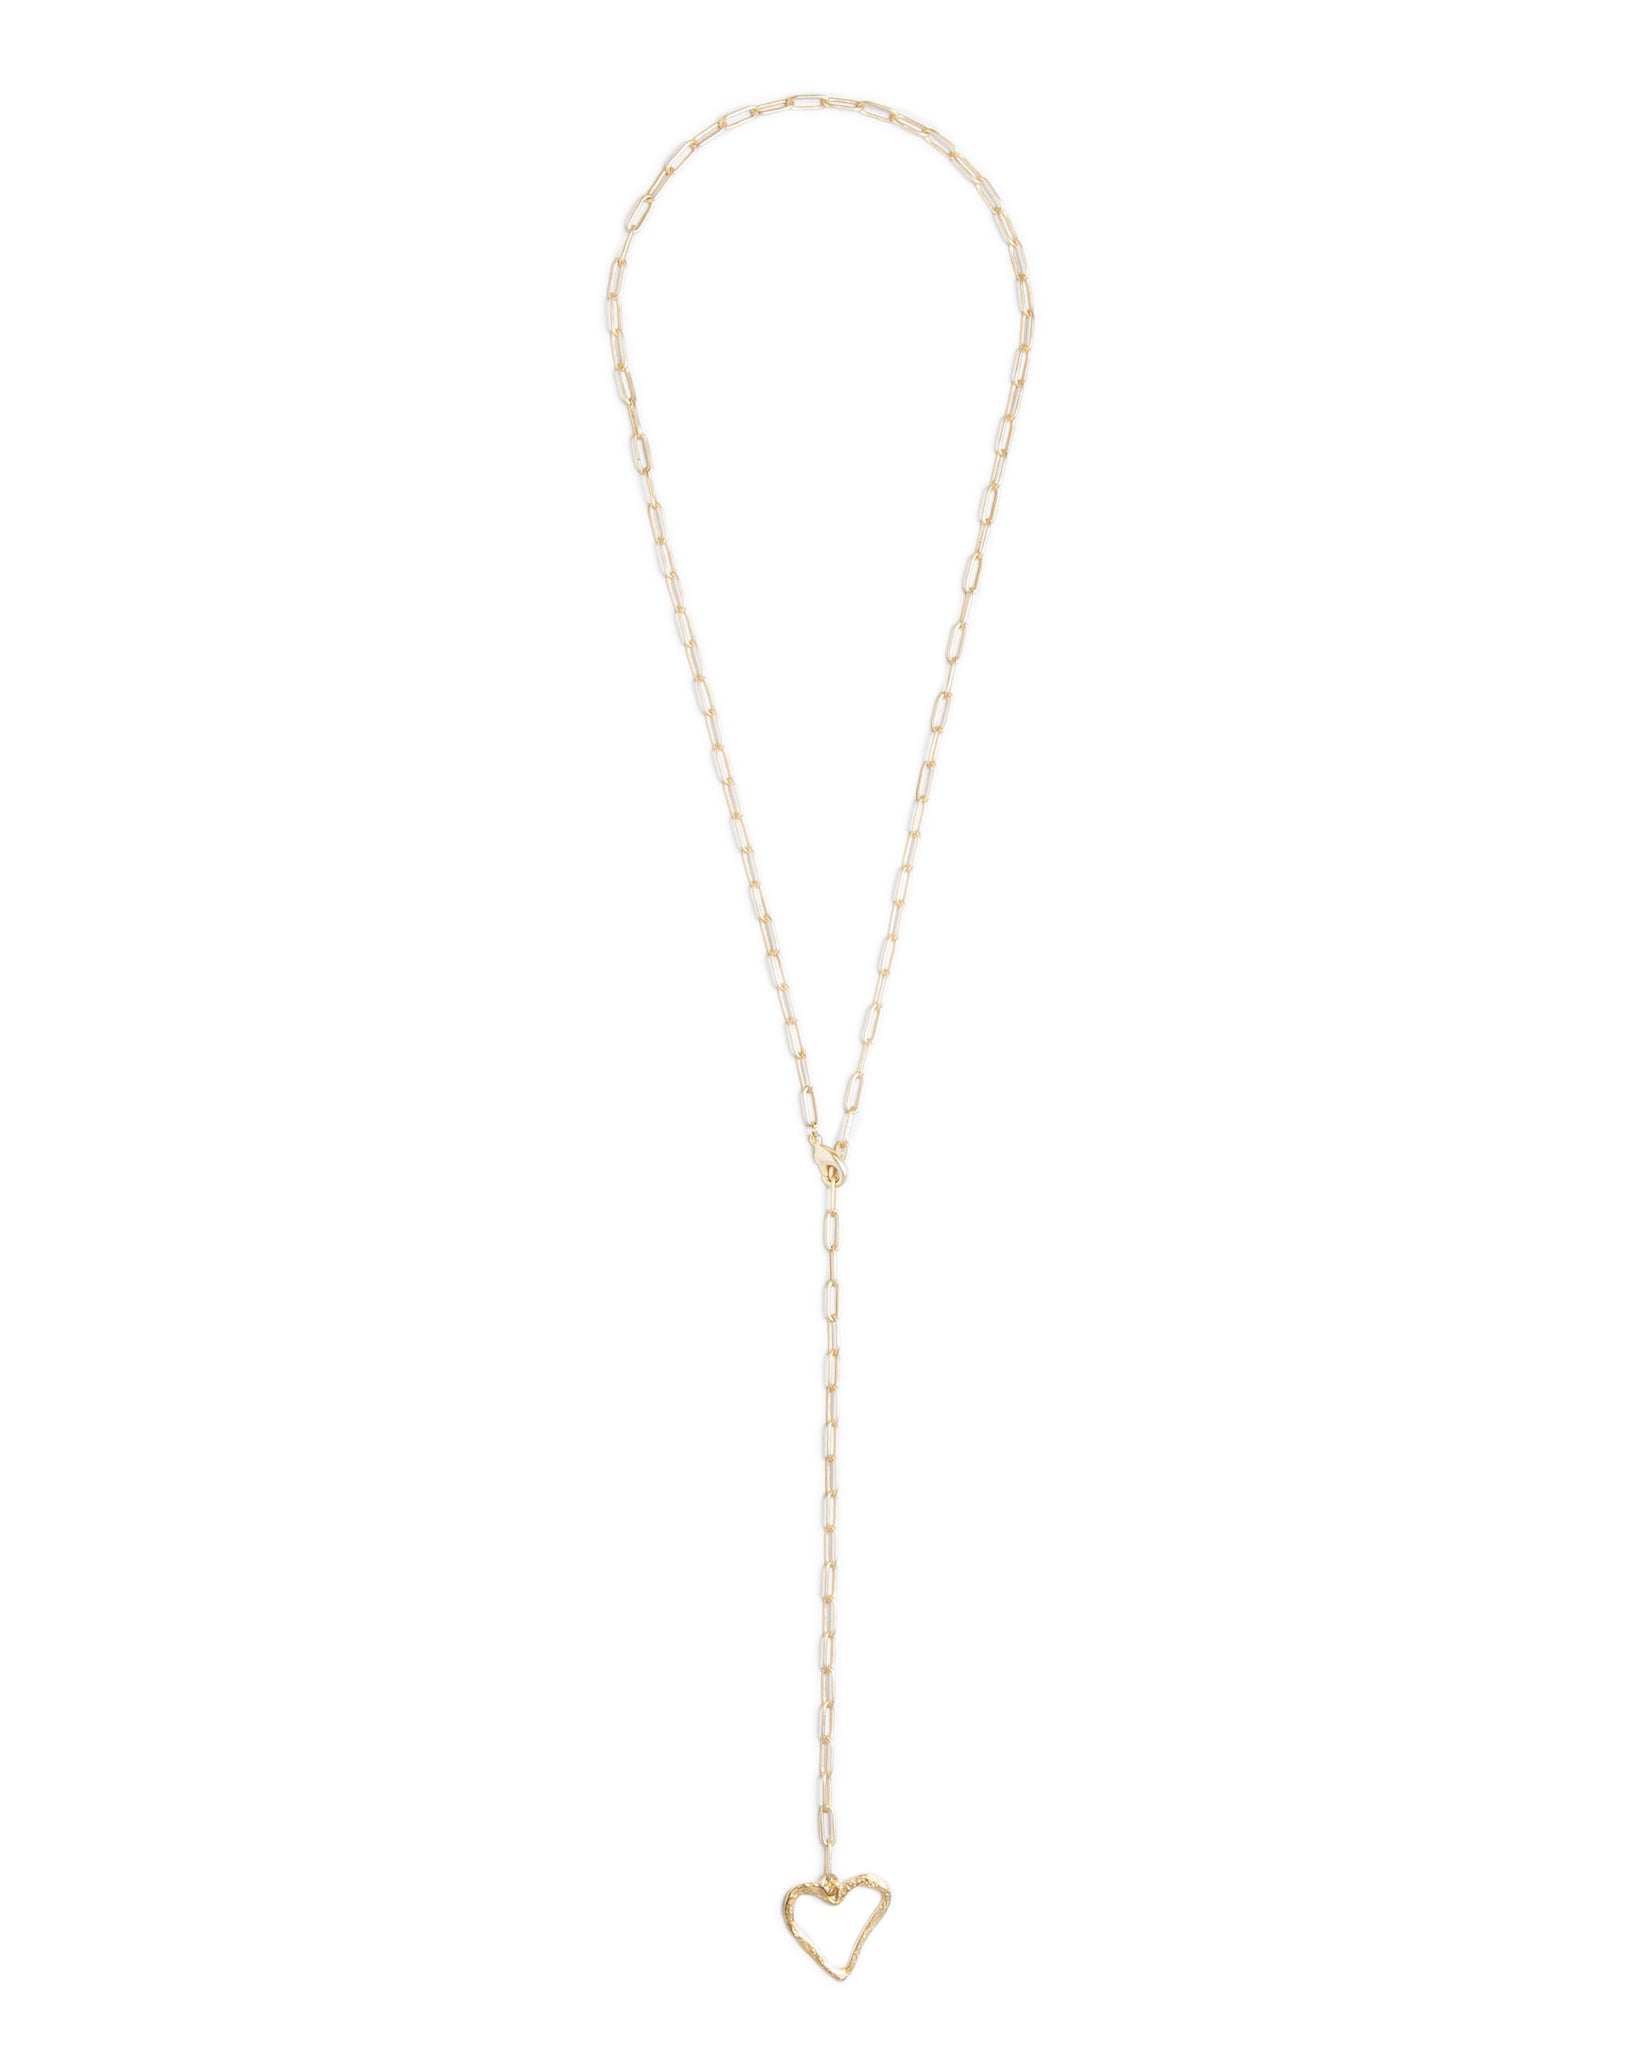 Small Gold Organic Open Heart “Y” Necklace on Paperclip Chain